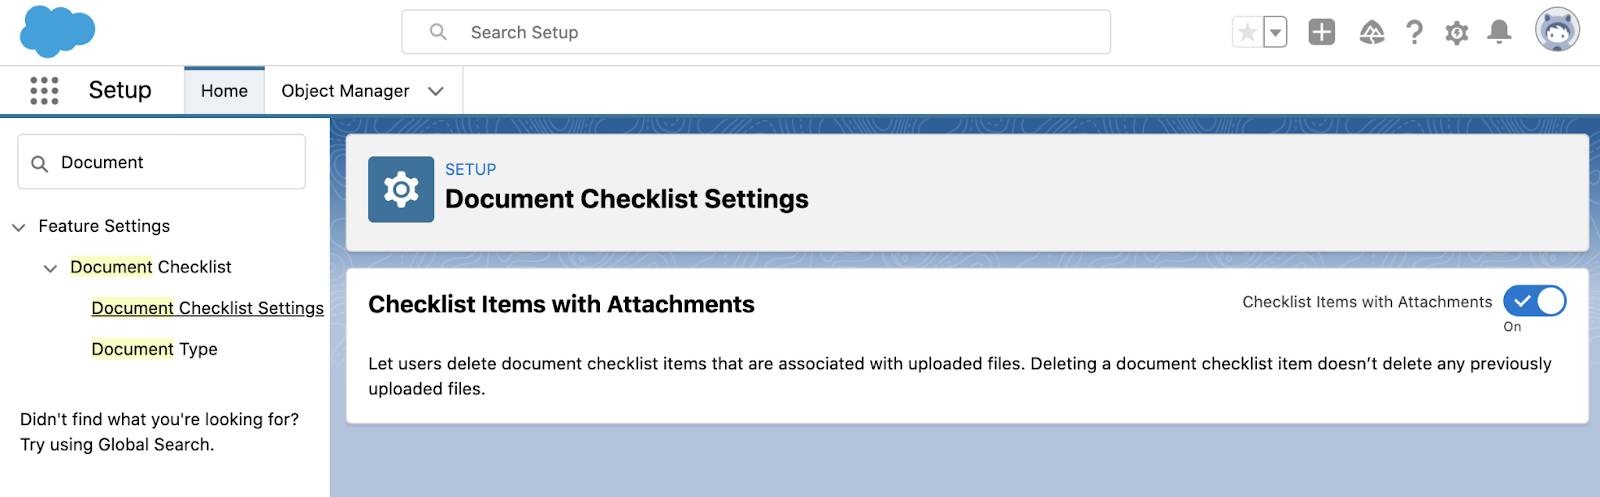 The Document Checklist Settings page with Checklist Items with Attachments enabled.